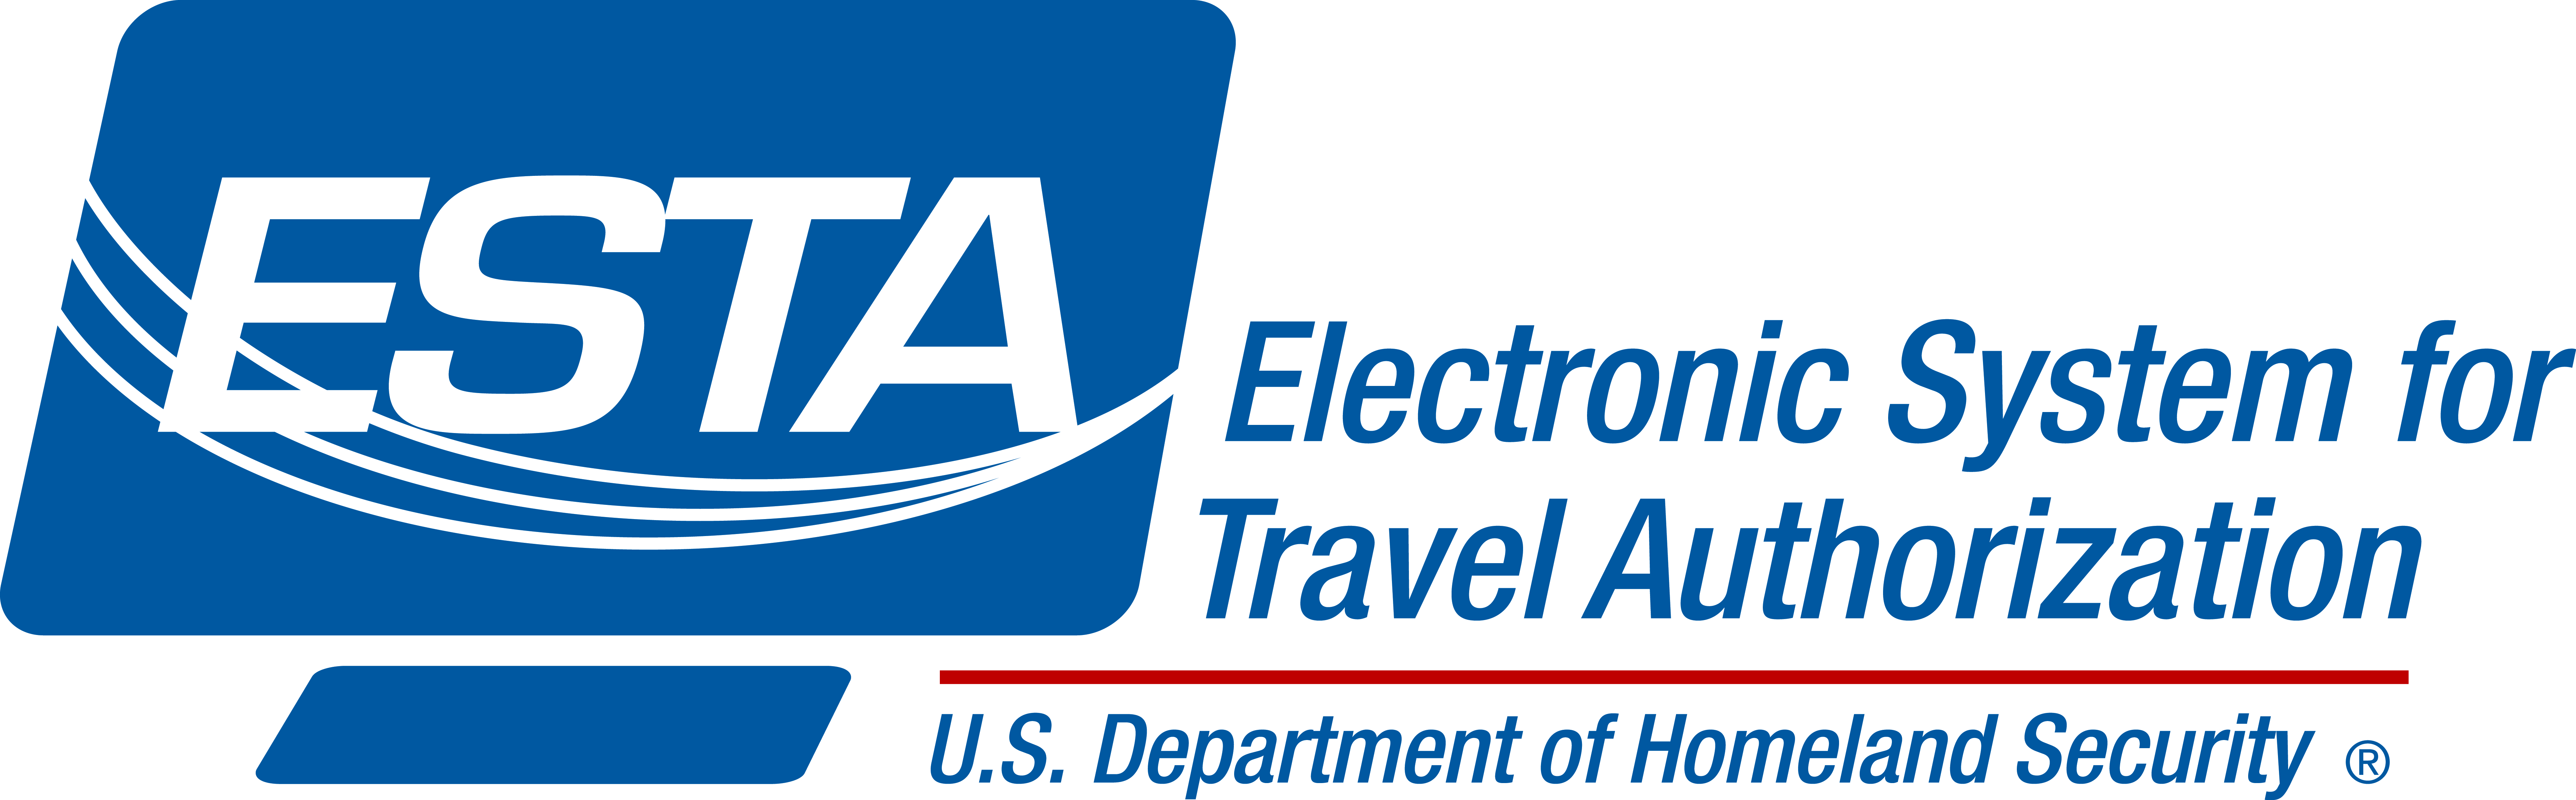 electronic system for travel authorization | u.s. customs and border